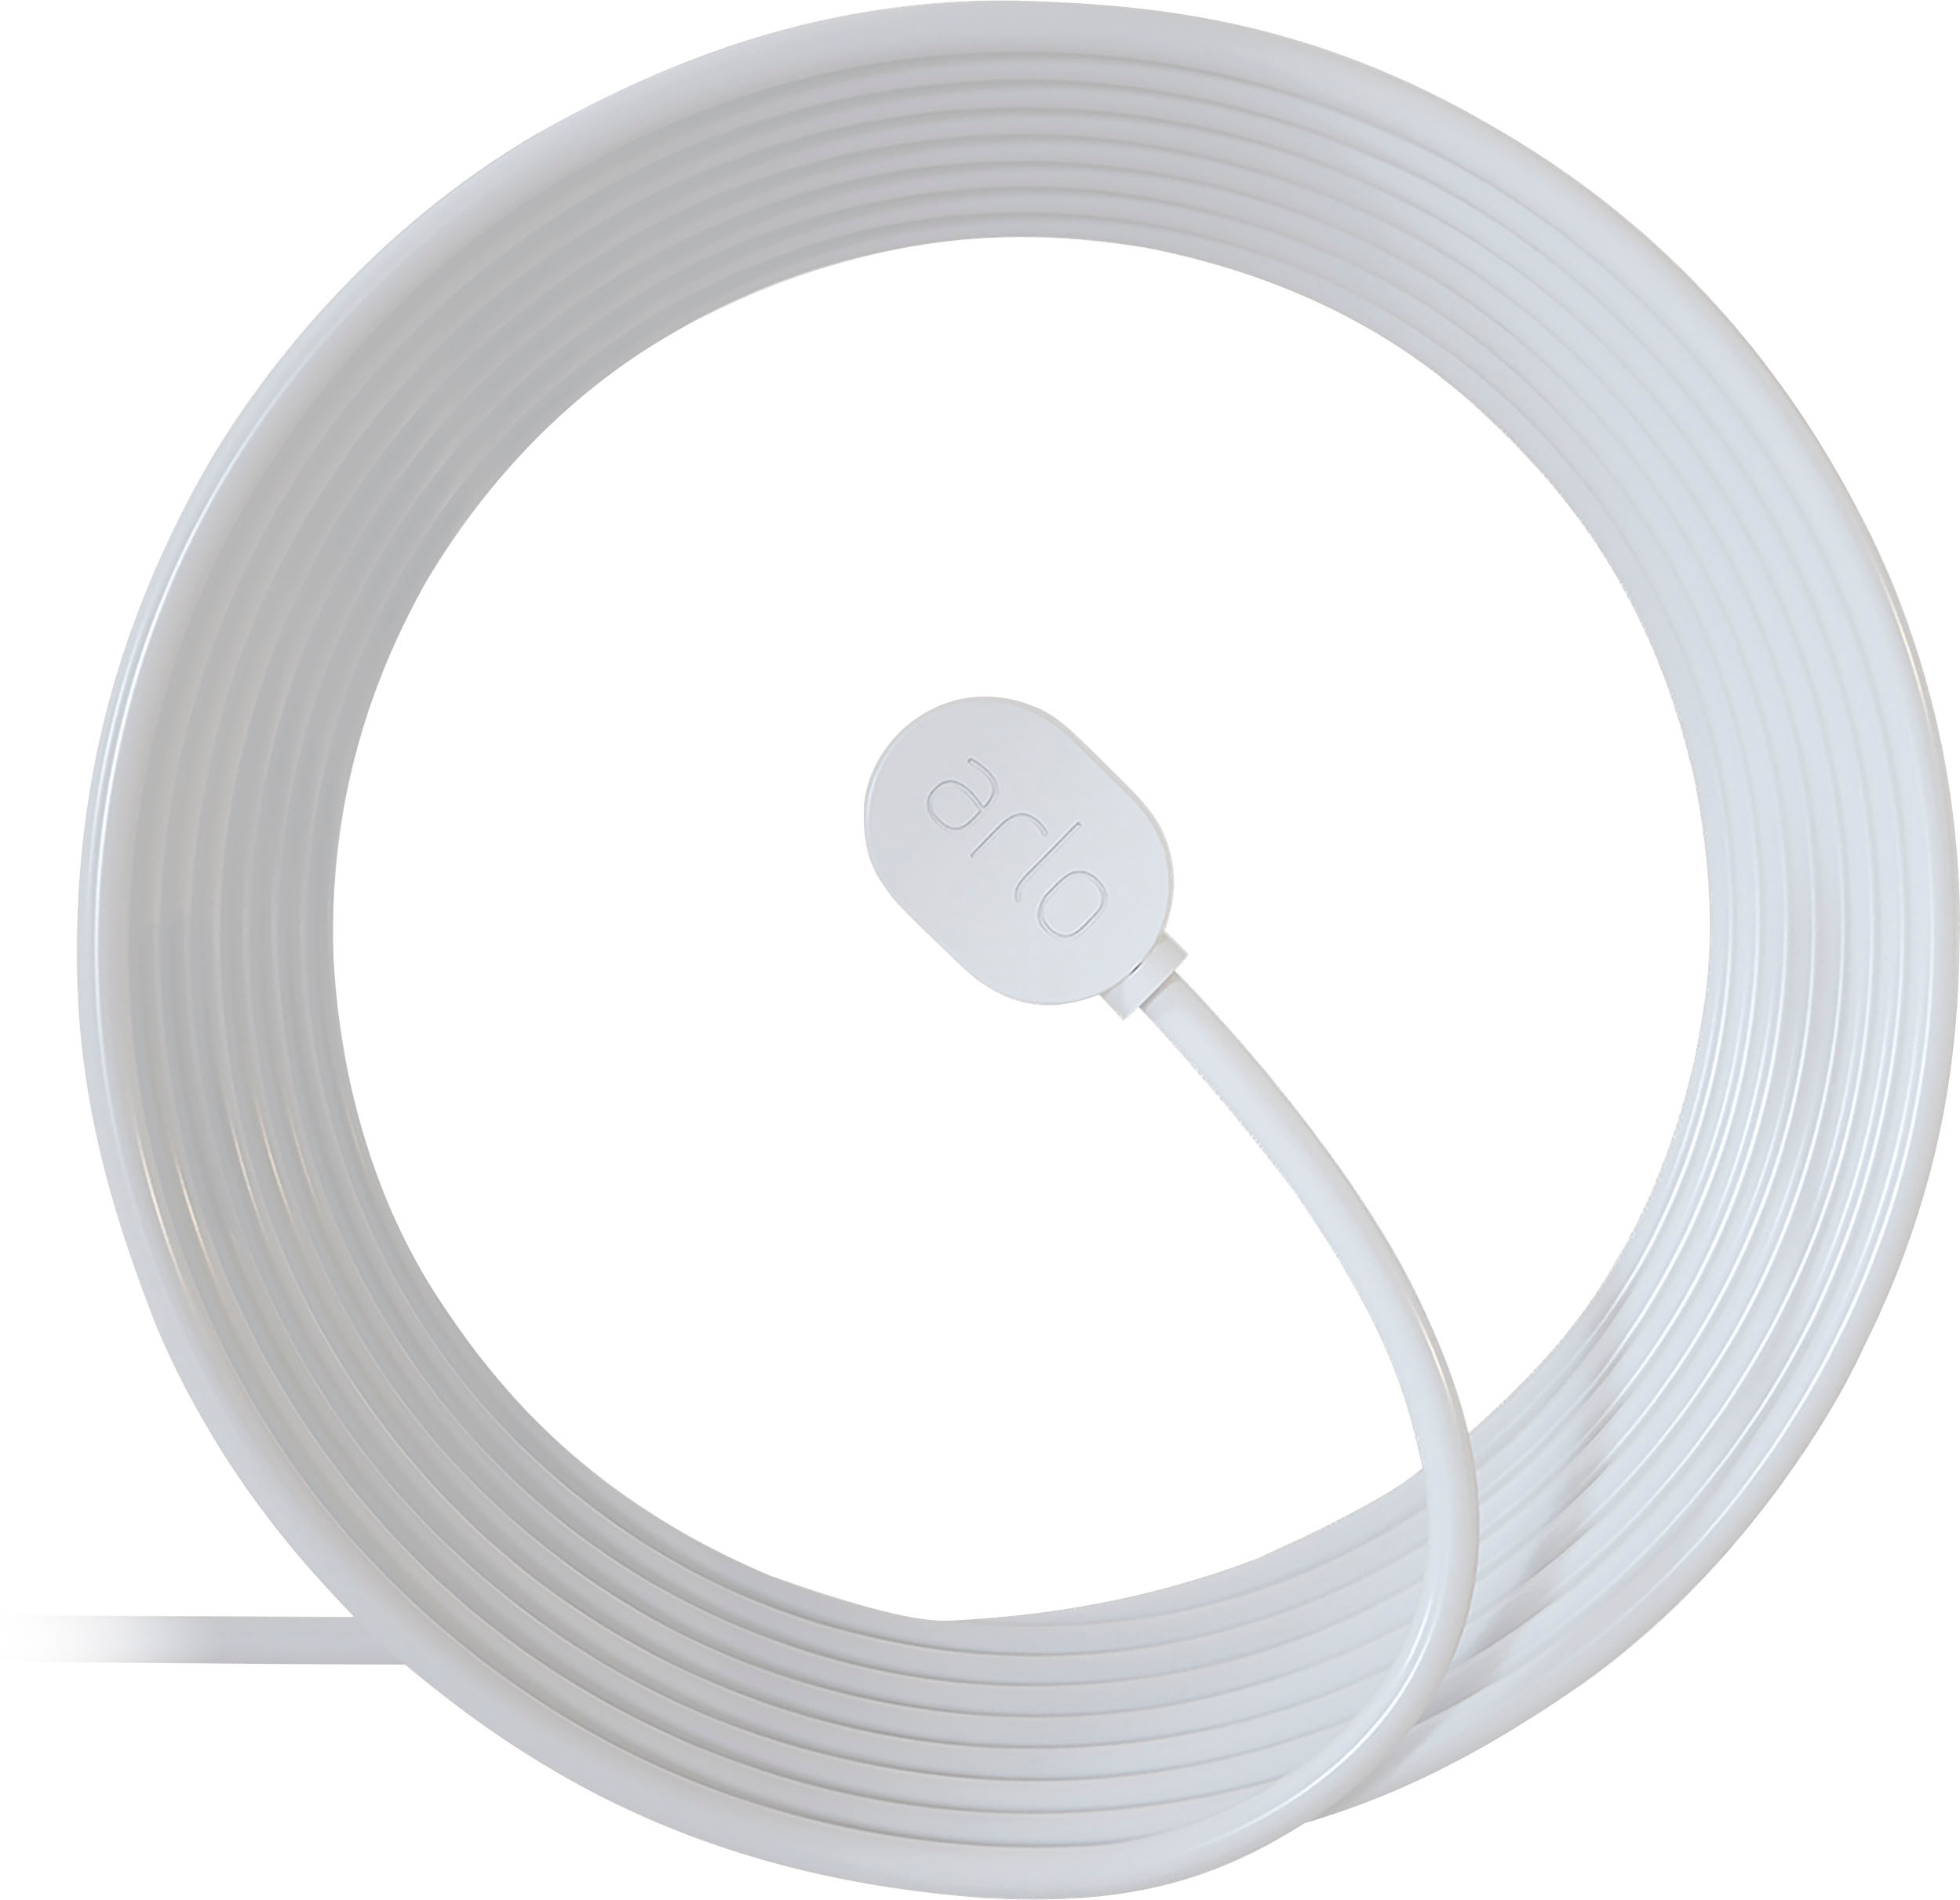 Arlo 25' Outdoor Magnetic Charging Cable for Pro 5S 2K, Pro 4, Pro 3, Ultra  2, Ultra, and Floodlight Cameras White VMA5600C-100NAS Best Buy